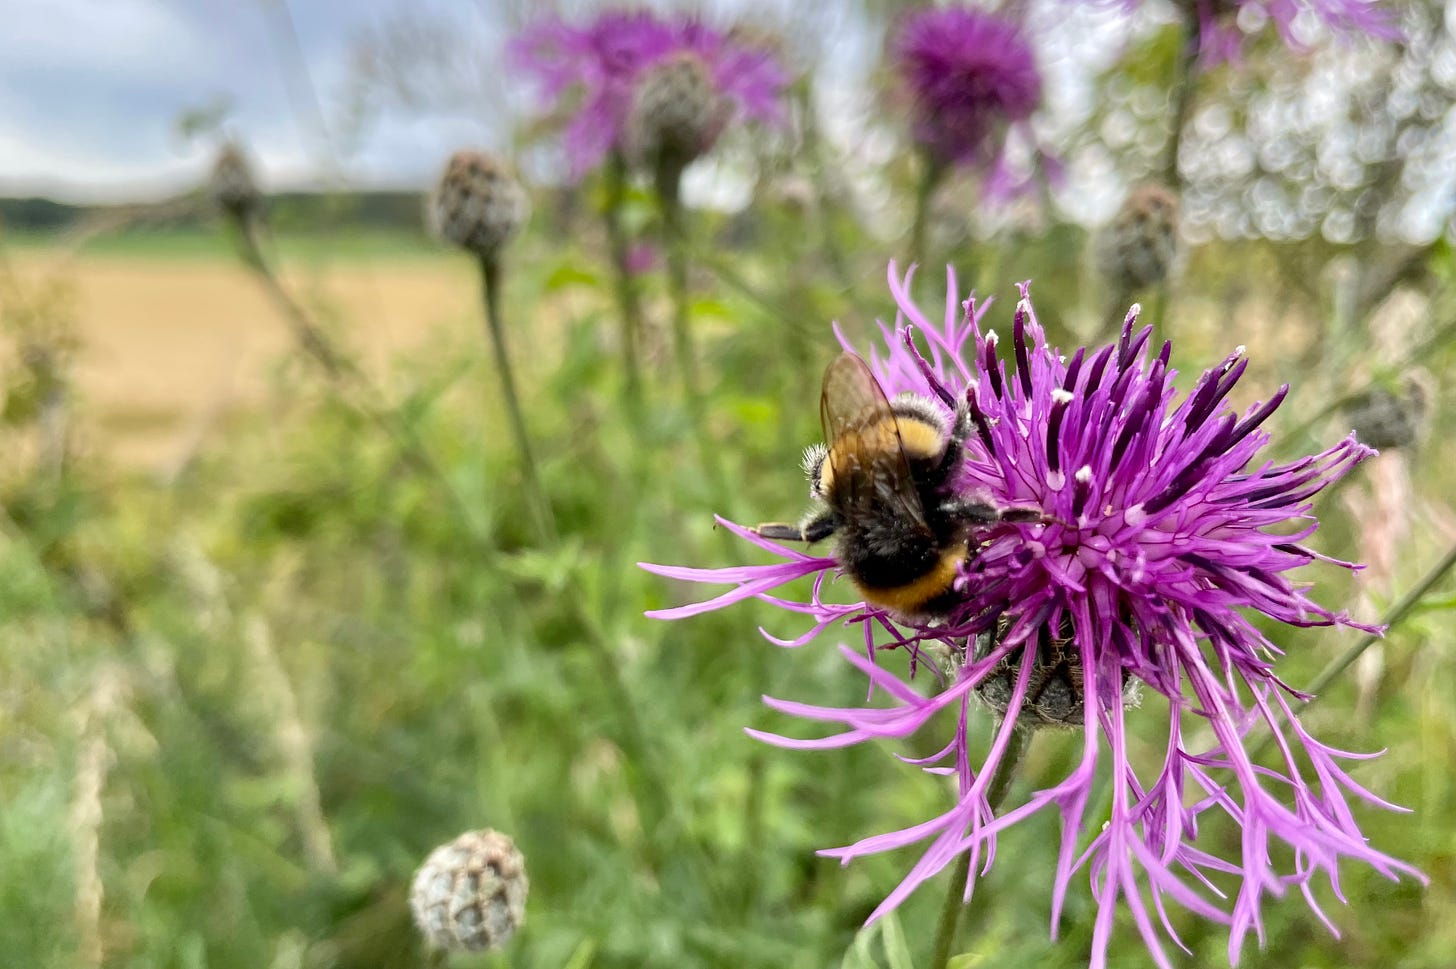 A bumblebee on a knapweed